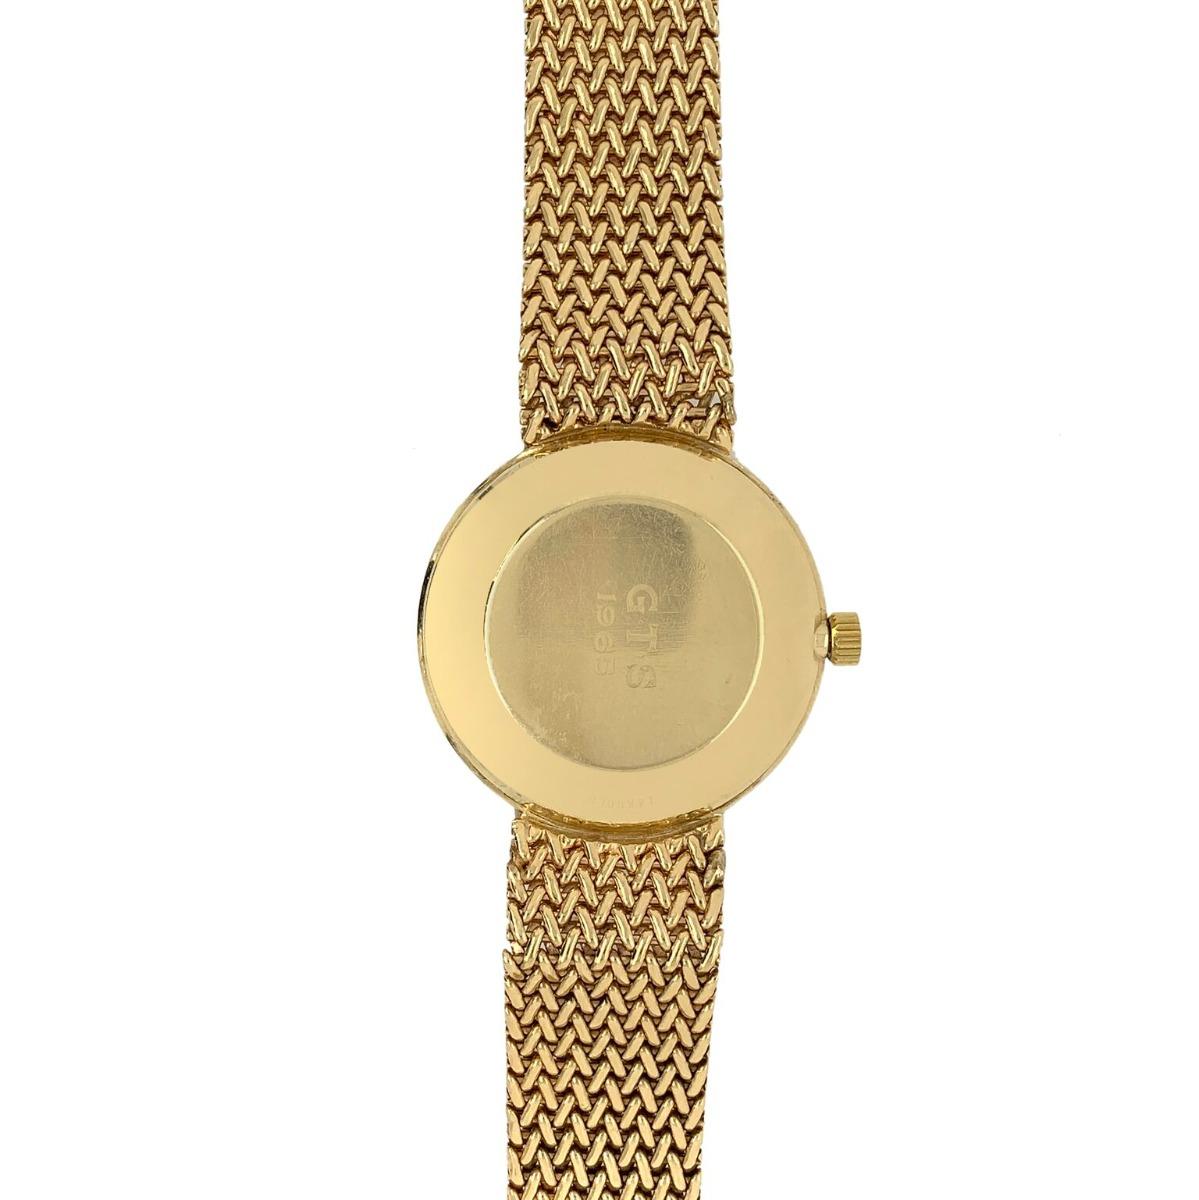 Tiffany & Co. 14 Karat Yellow Gold Vintage Wristwatch In Excellent Condition For Sale In New York, NY